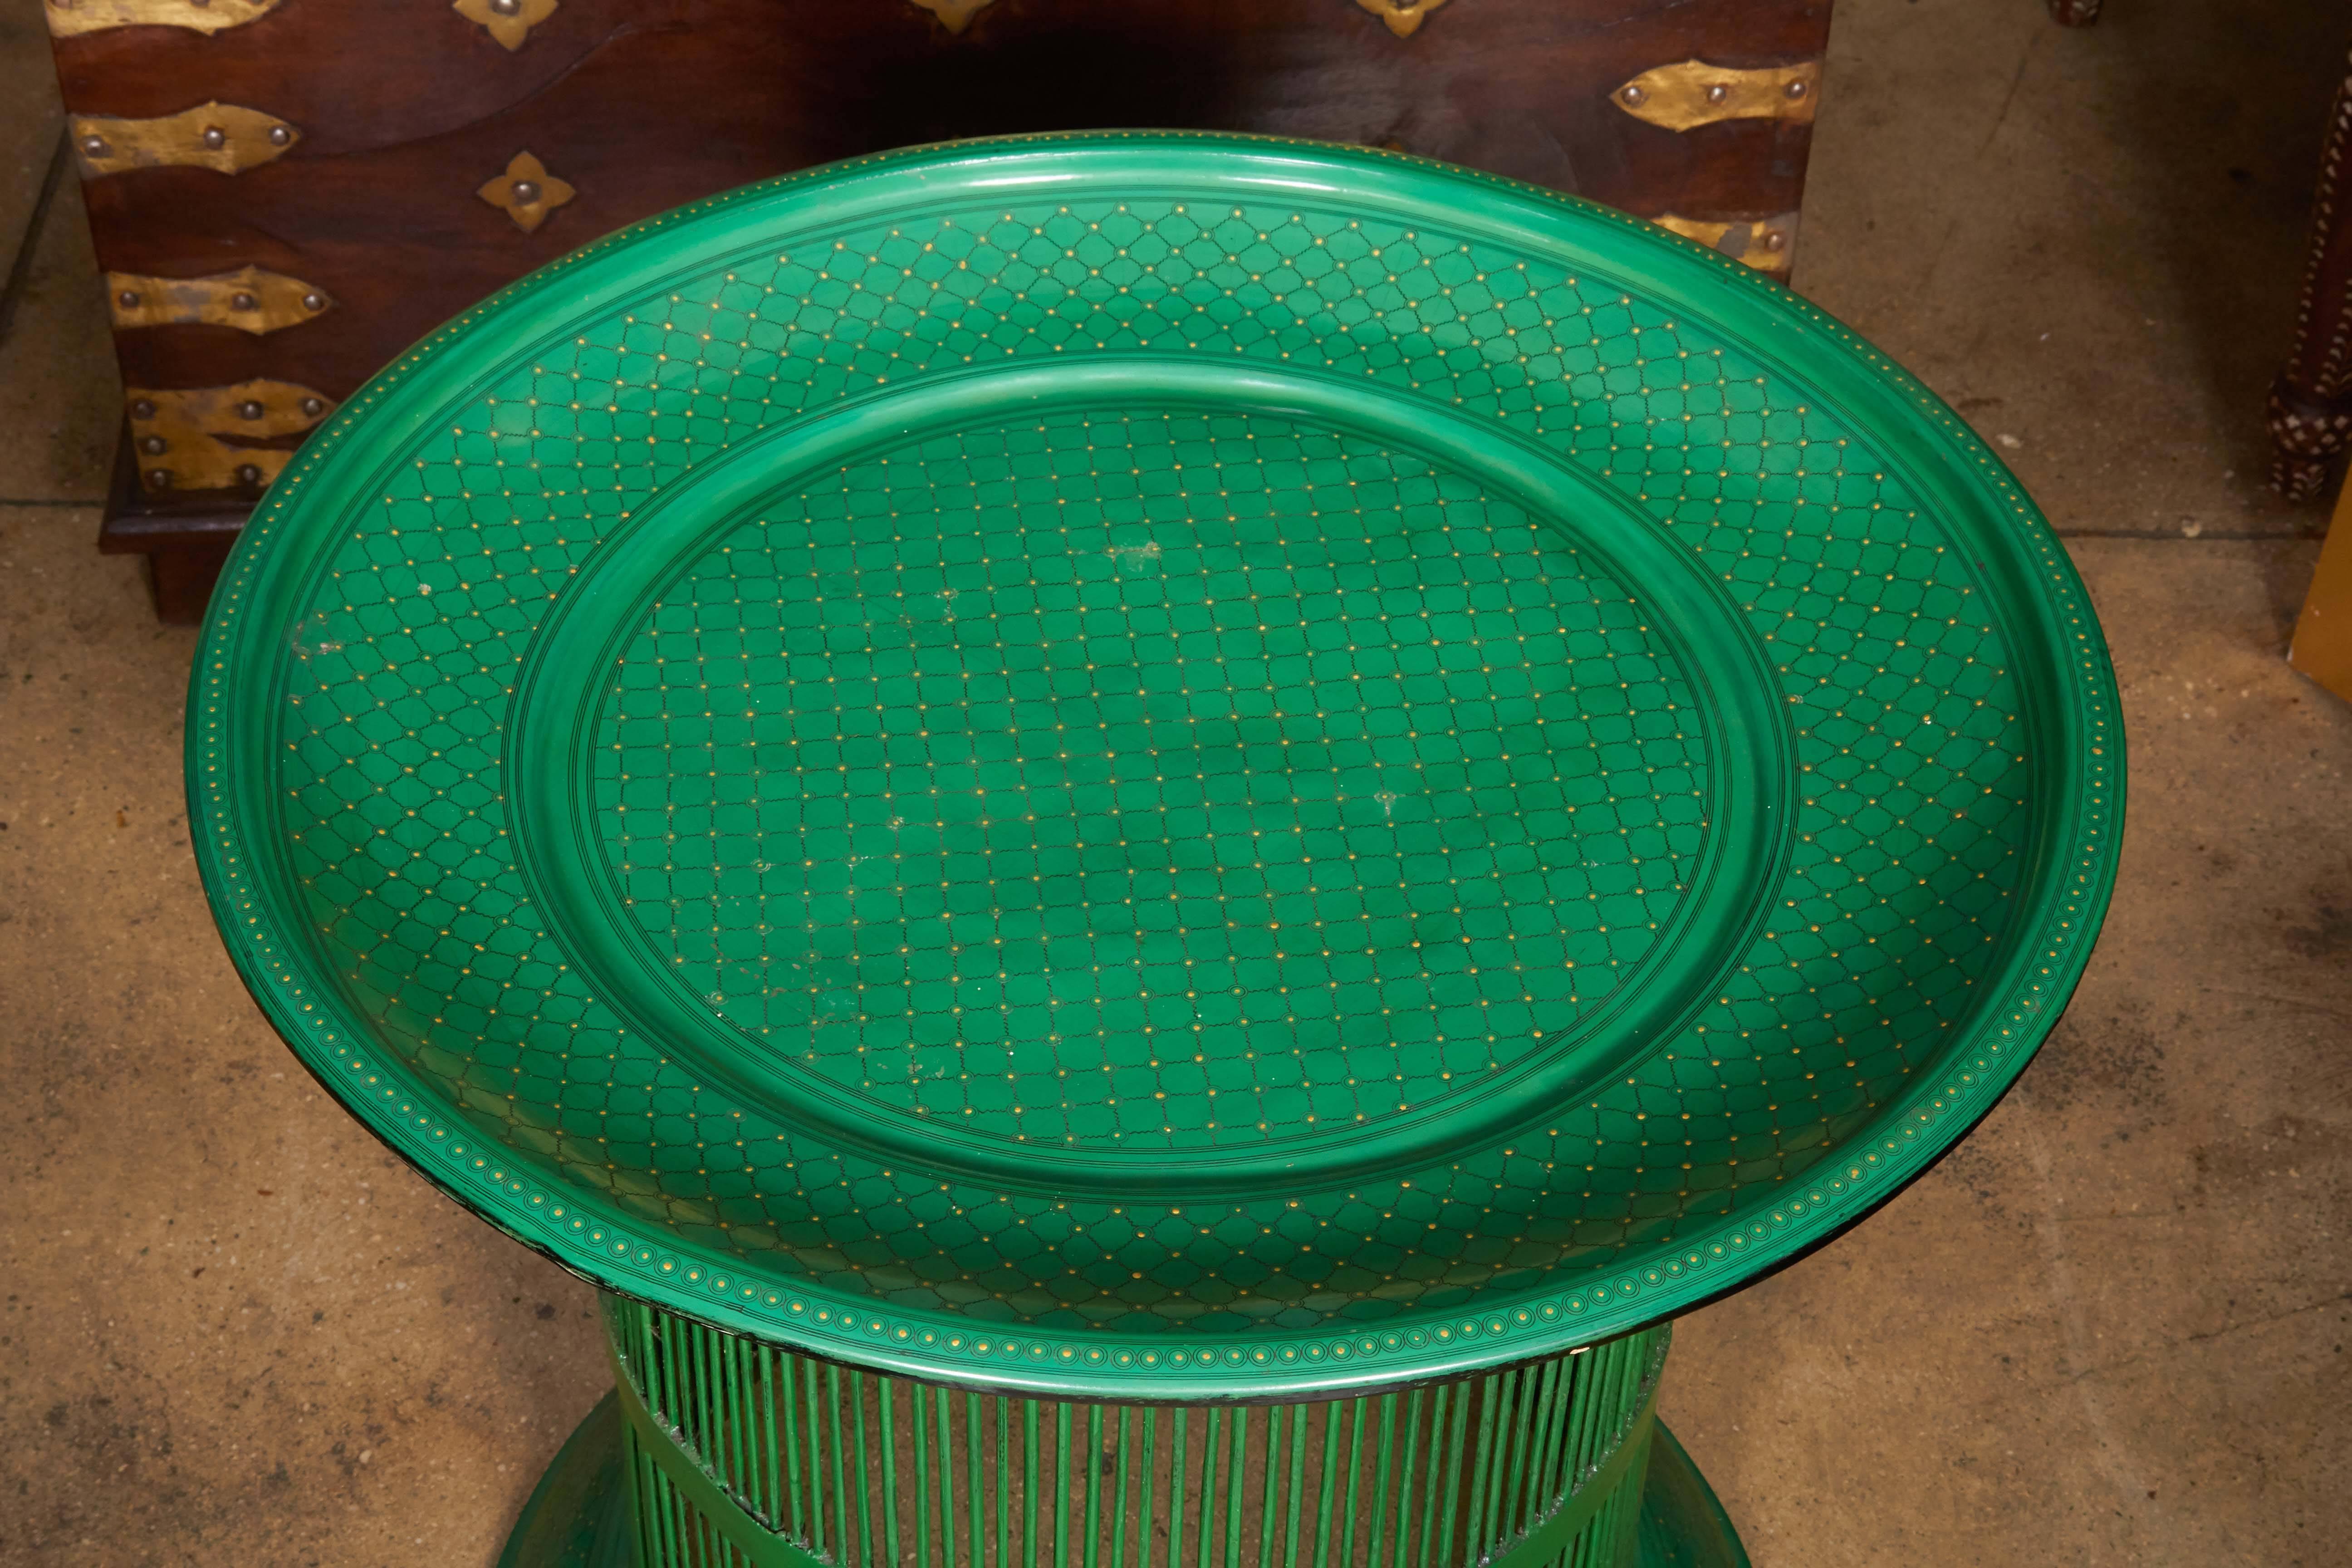 A round bamboo drum table from Myanmar in green lacquer and trimmed in a fine pattern in gold paint. A broad top over a thin ribbed base.